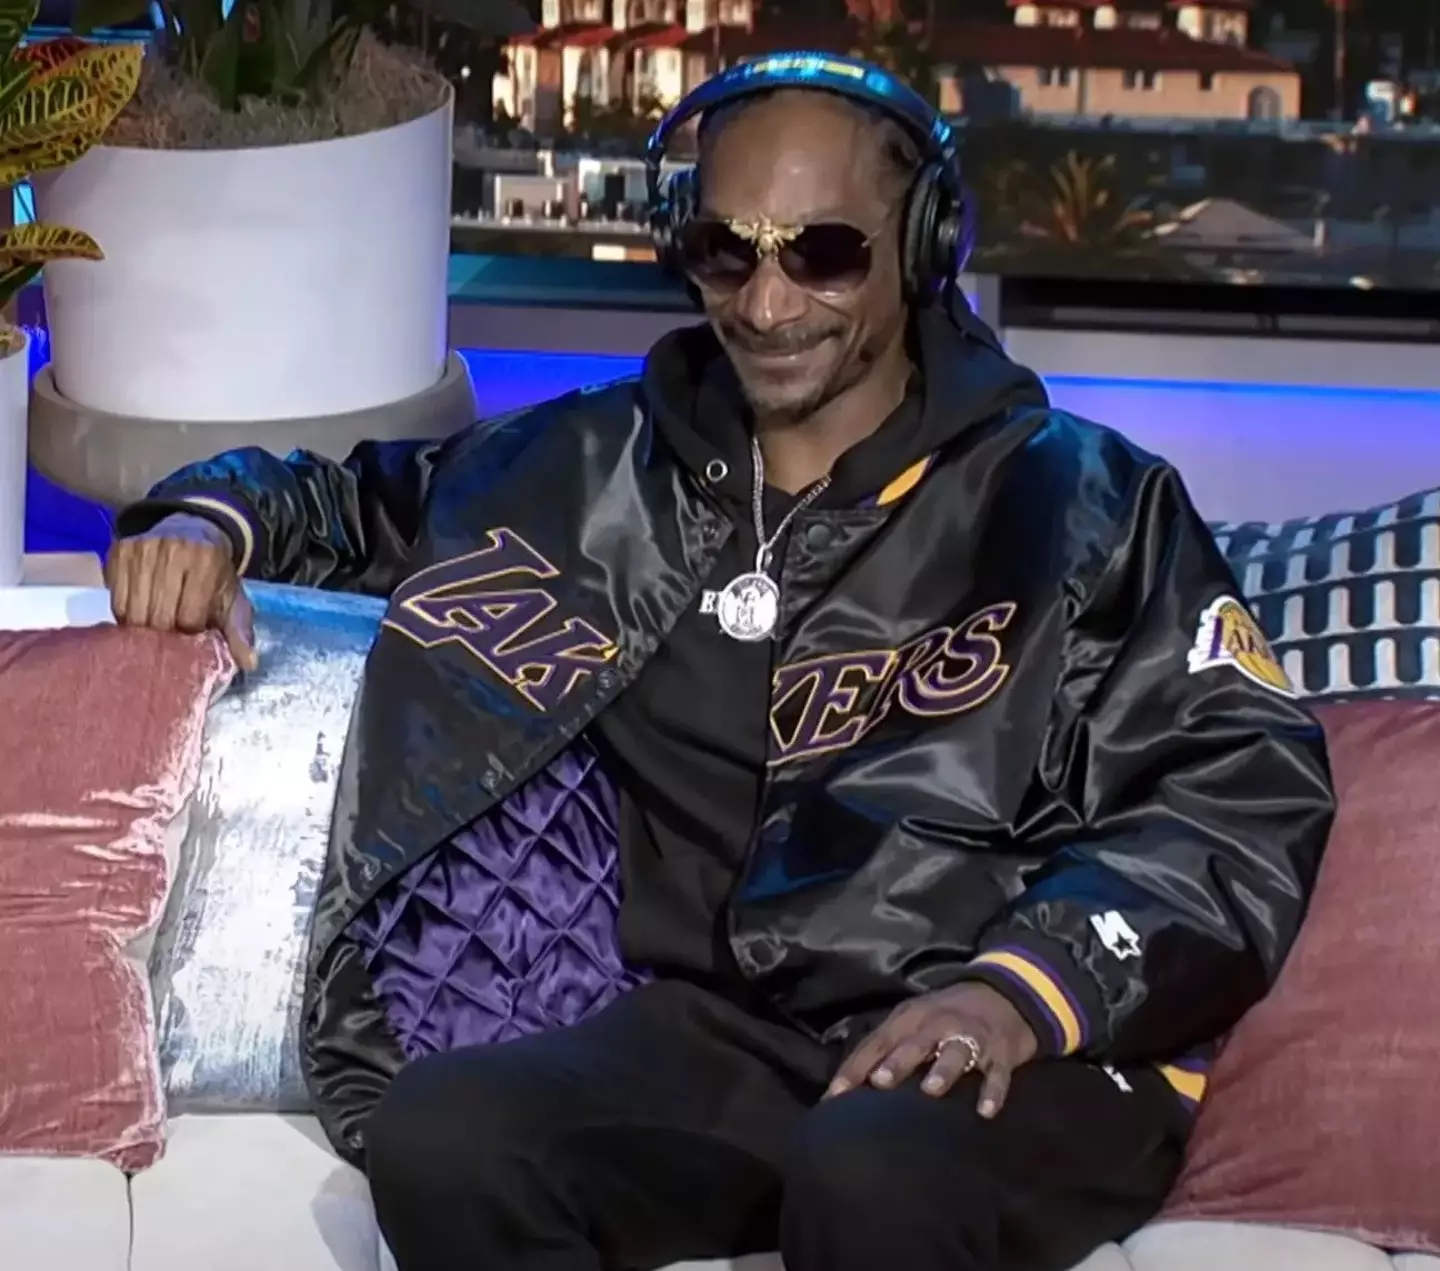 When Snoop speaks about weed, you better listen. Well, maybe in the past.